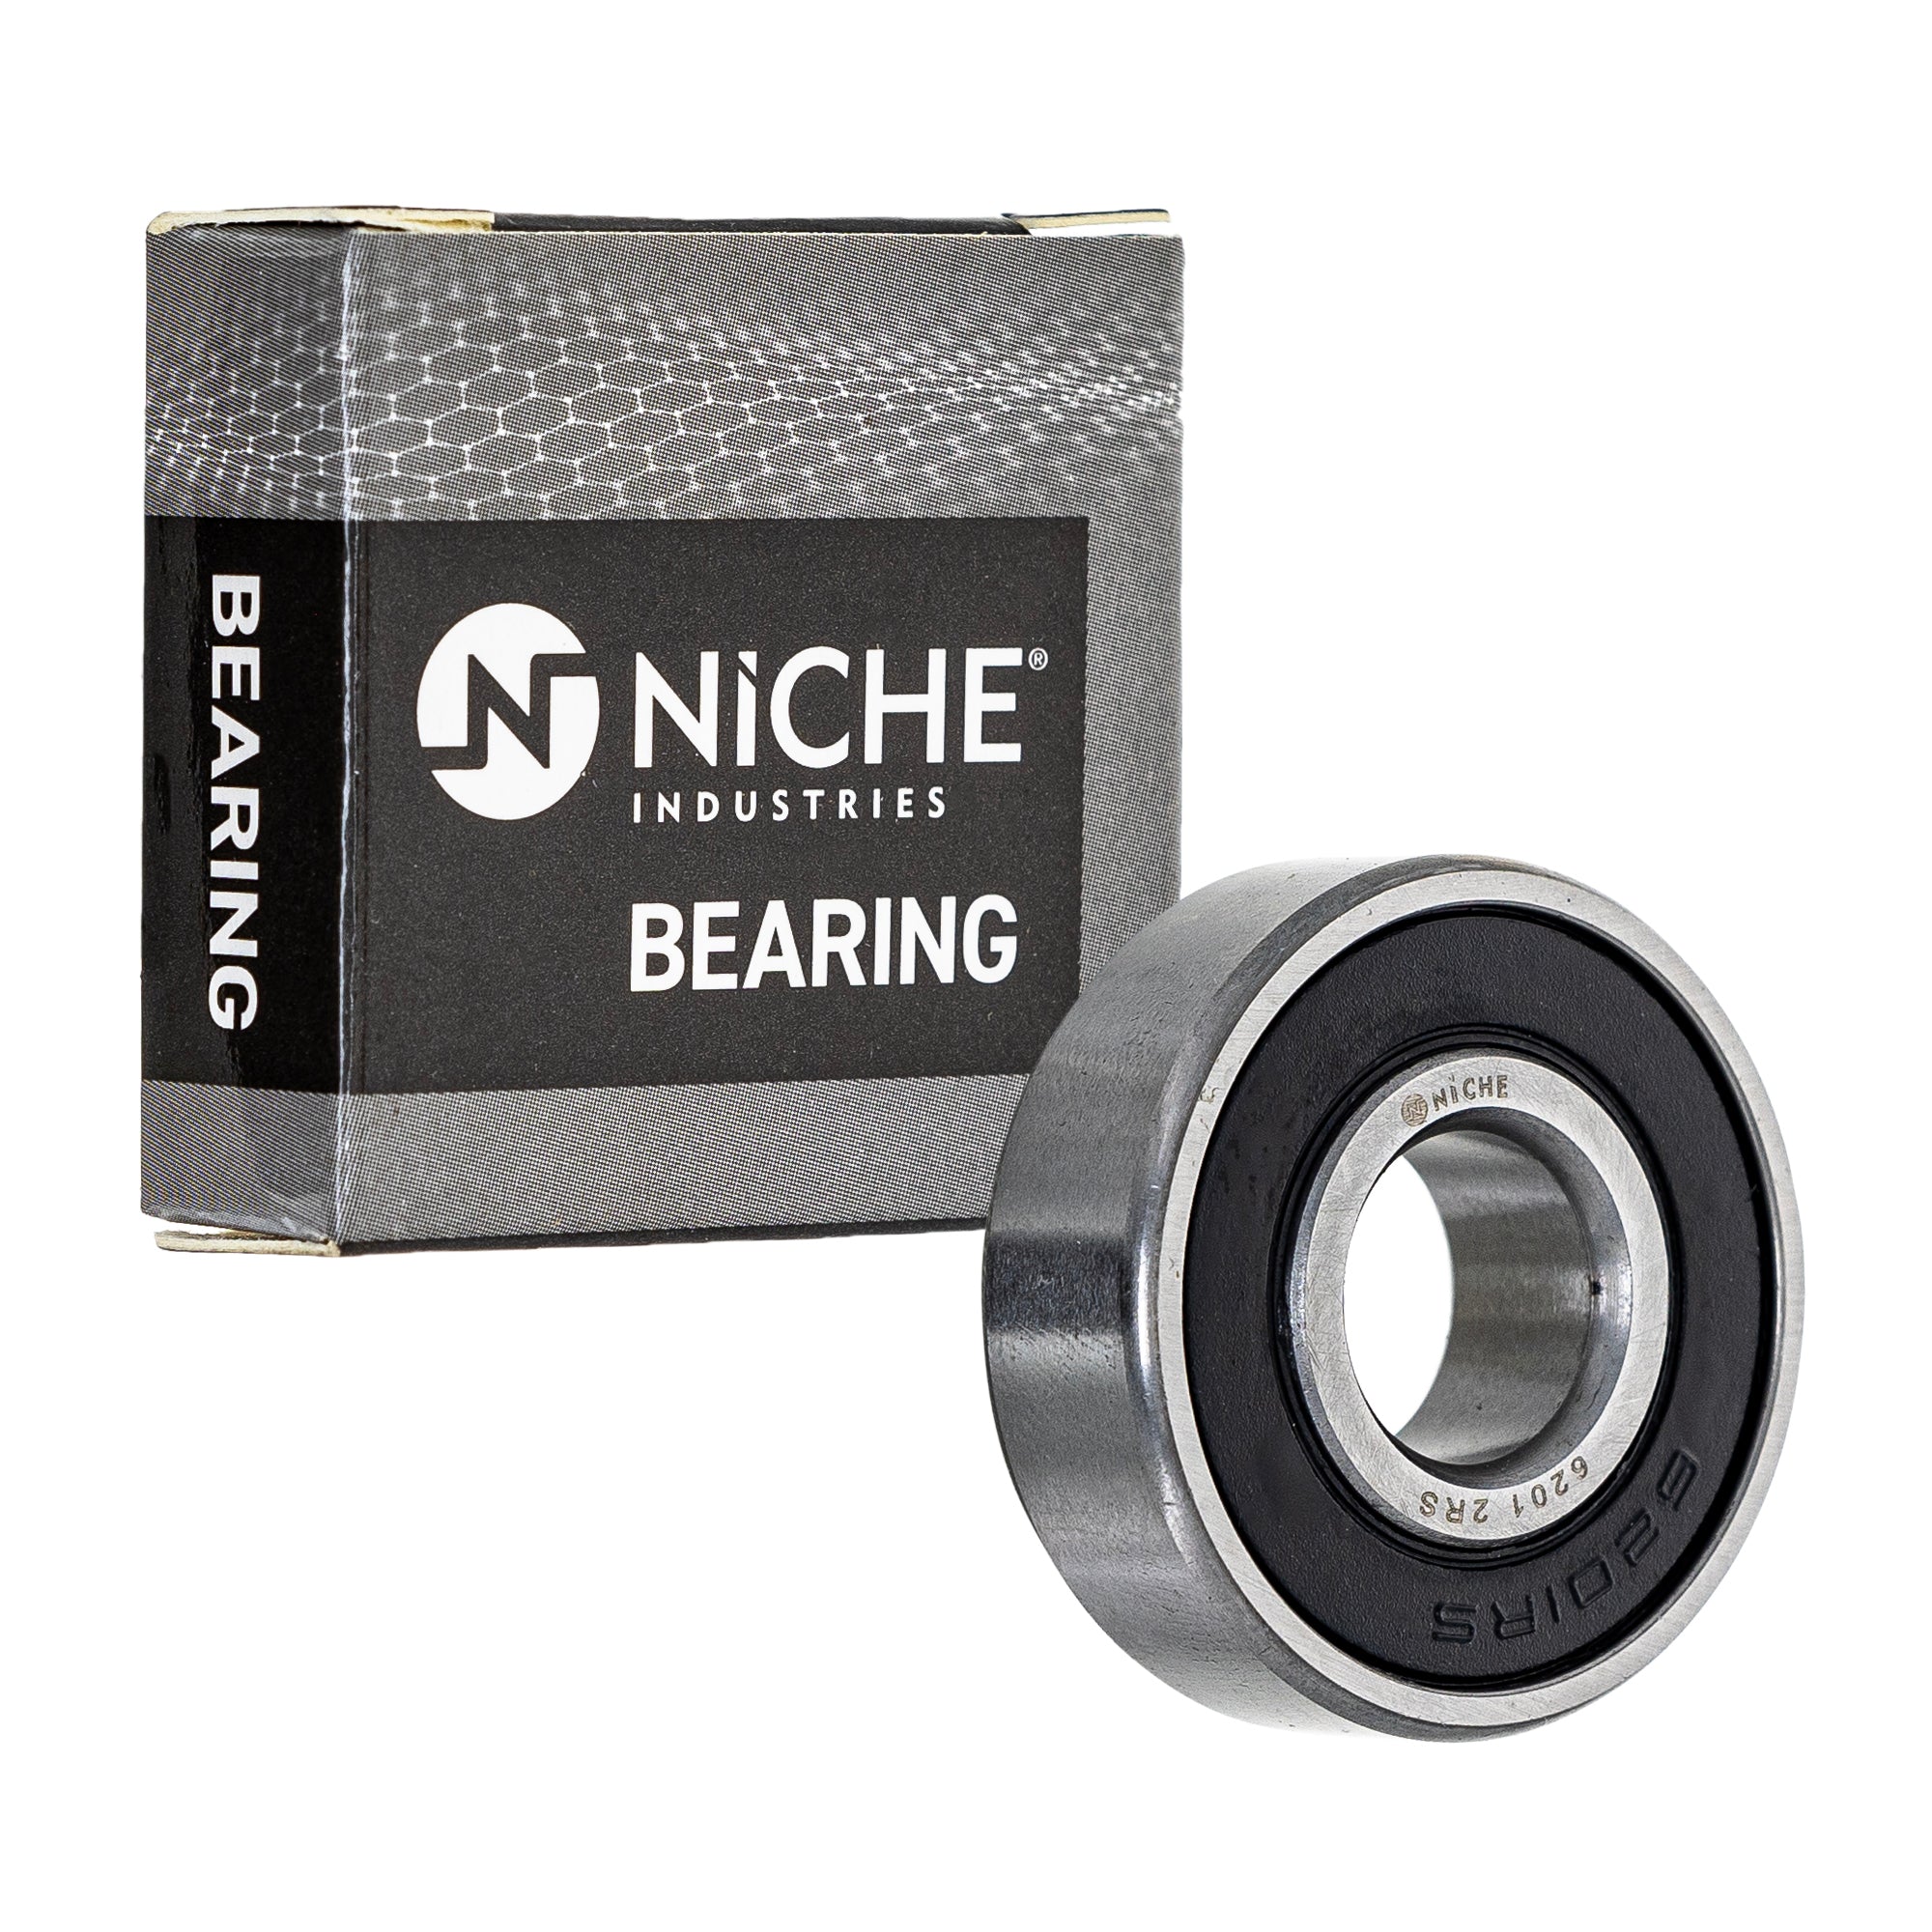 NICHE 519-CBB2247R Bearing 10-Pack for zOTHER ZB50 Z50RD Z50R XR80R